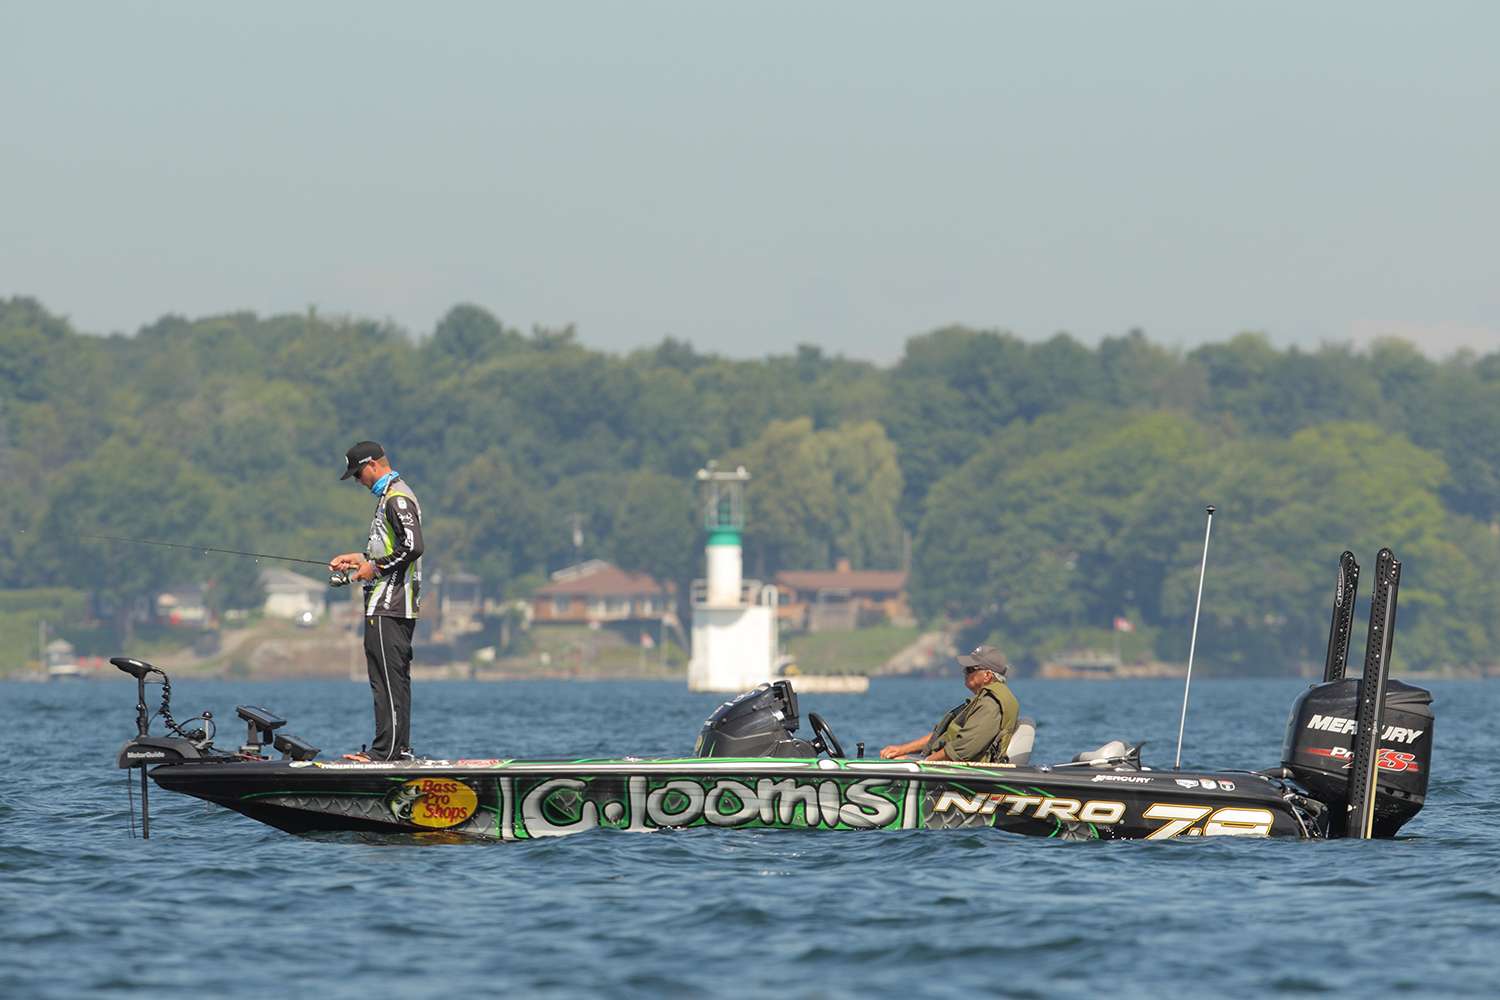 VanDam has fished 66 tournaments with B.A.S.S., winning twice and placing 13 times in the Top 10. He was recently named by Bassmaster.com as one of the Top 30 bass anglers under the age of the 30 on the B.A.S.S. circuit.